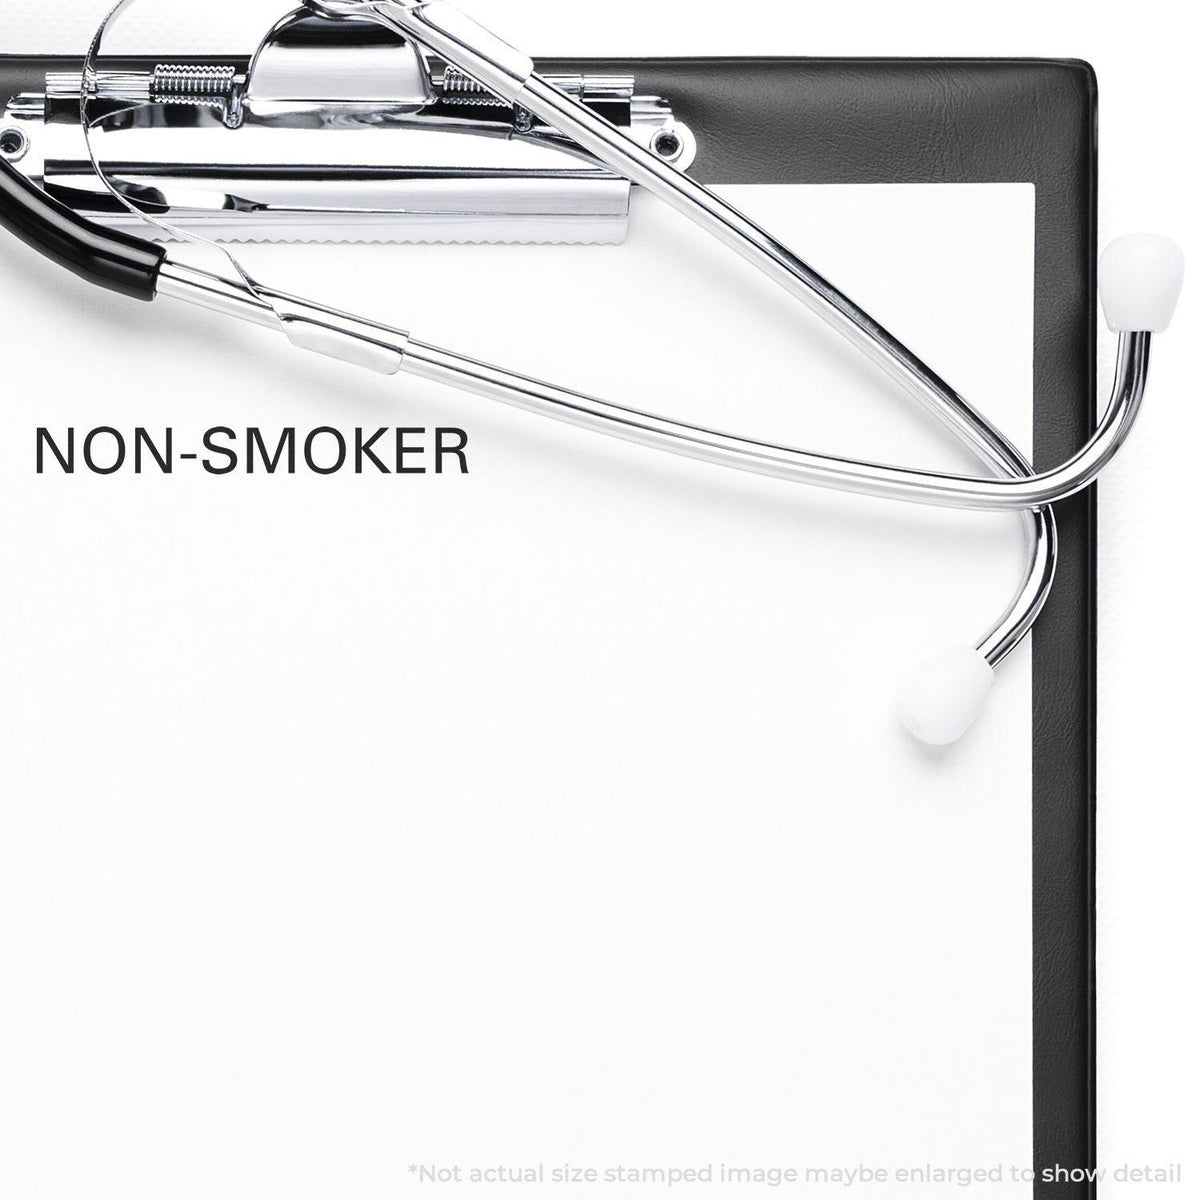 In Use Large Non-Smoker Rubber Stamp Image